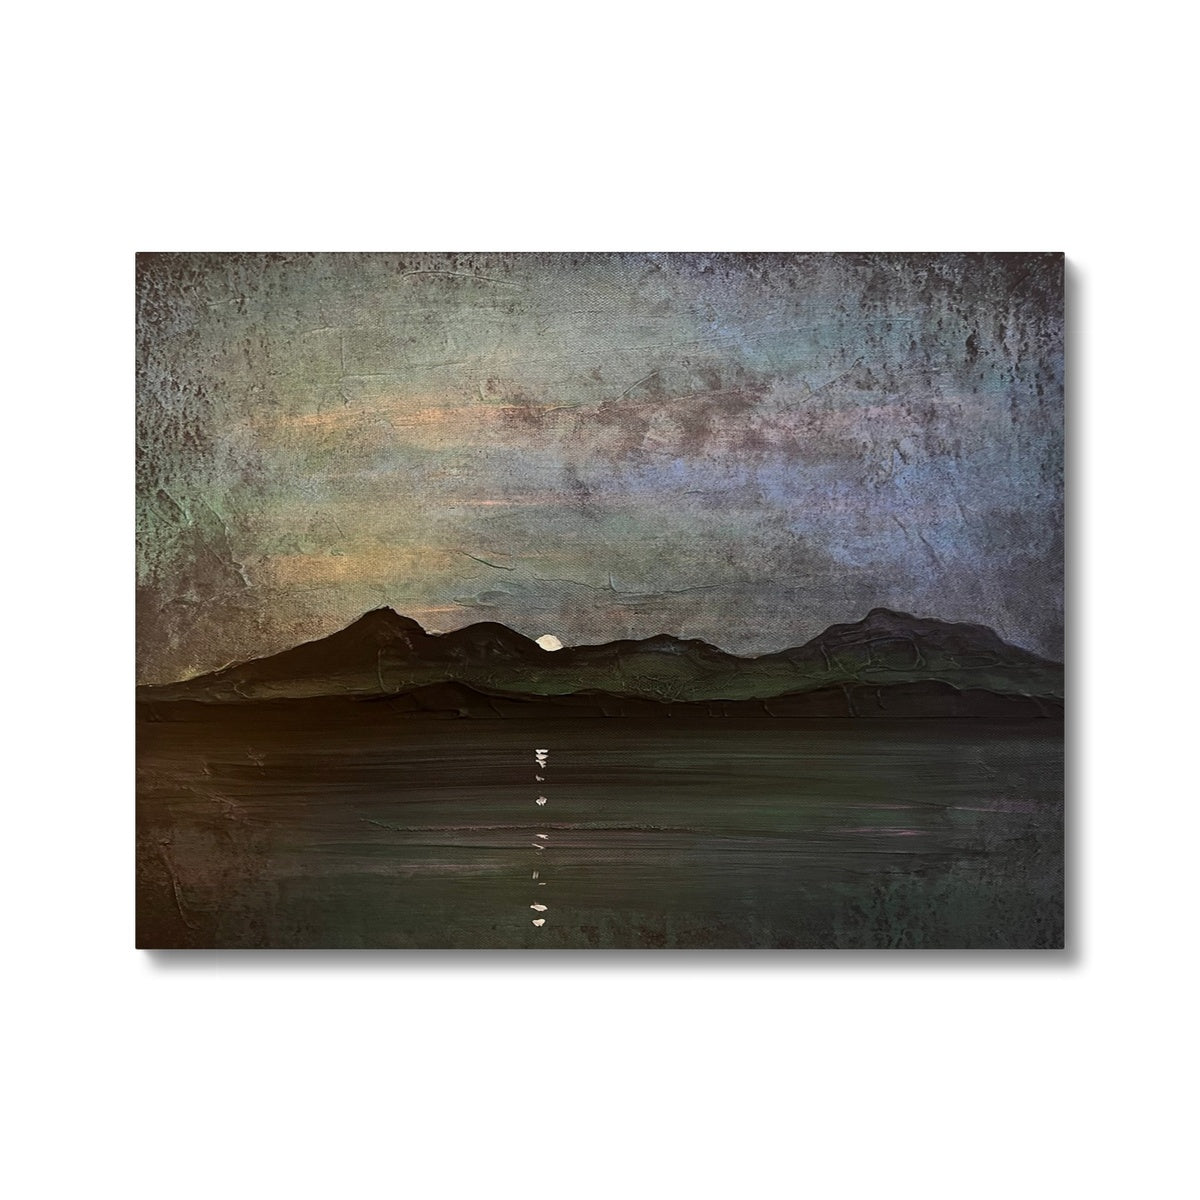 Sleeping Warrior Moonlight Arran Painting | Canvas From Scotland-Contemporary Stretched Canvas Prints-Arran Art Gallery-24"x18"-Paintings, Prints, Homeware, Art Gifts From Scotland By Scottish Artist Kevin Hunter